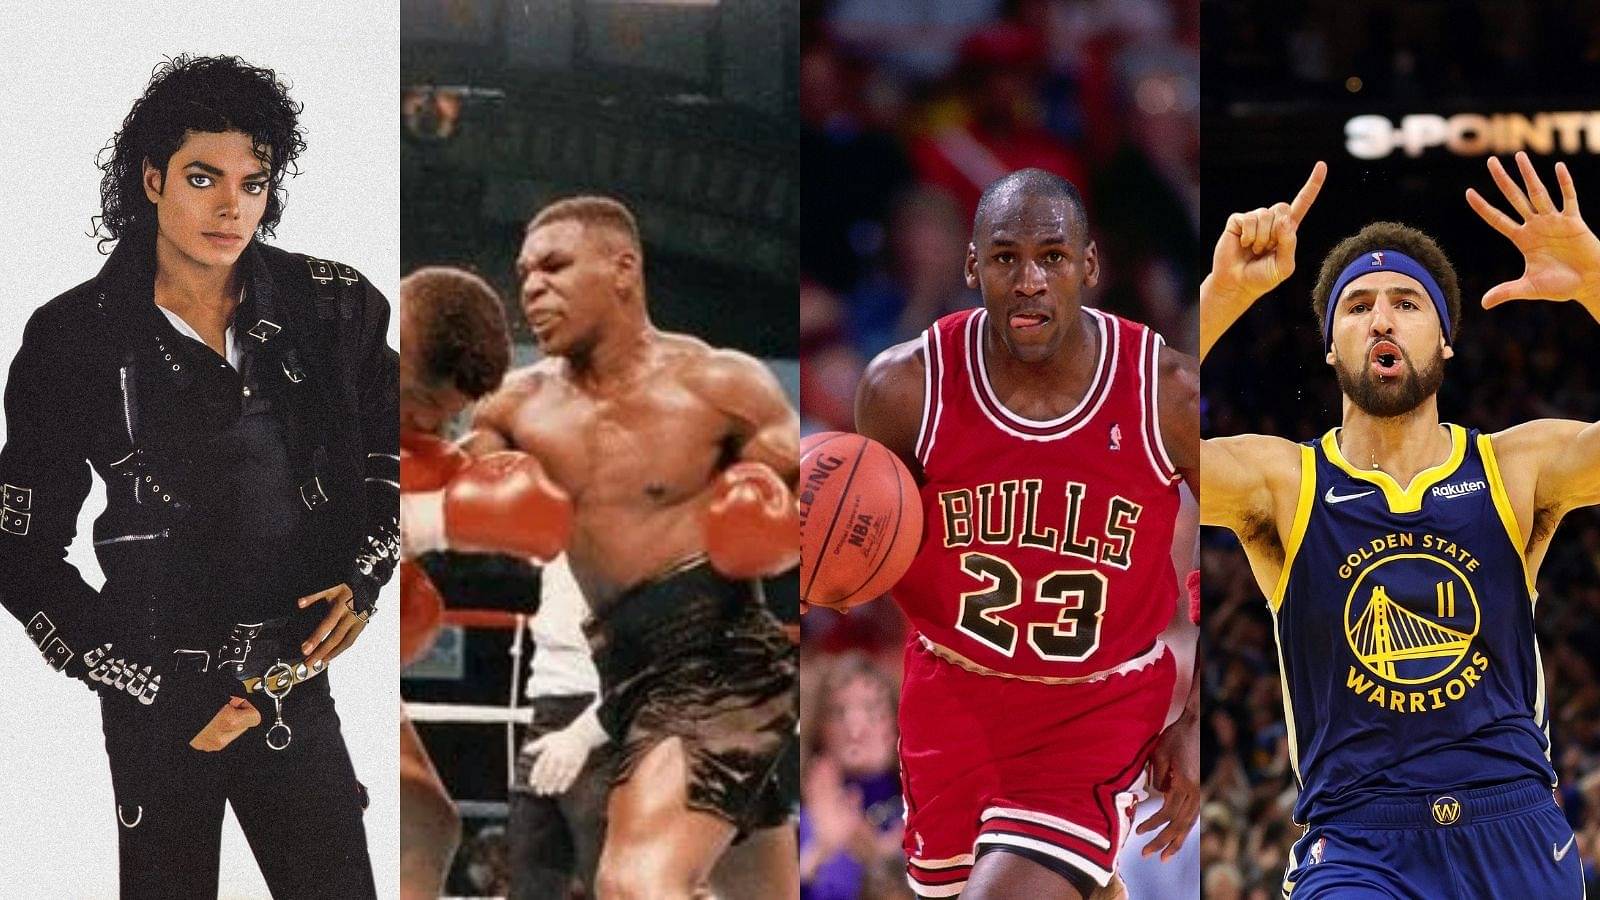 "Michael Jackson, Mike Tyson, Michael Jordan and Game 6 Klay": Warriors star tells us a cryptic tale through IG stories after series win vs Grizzlies